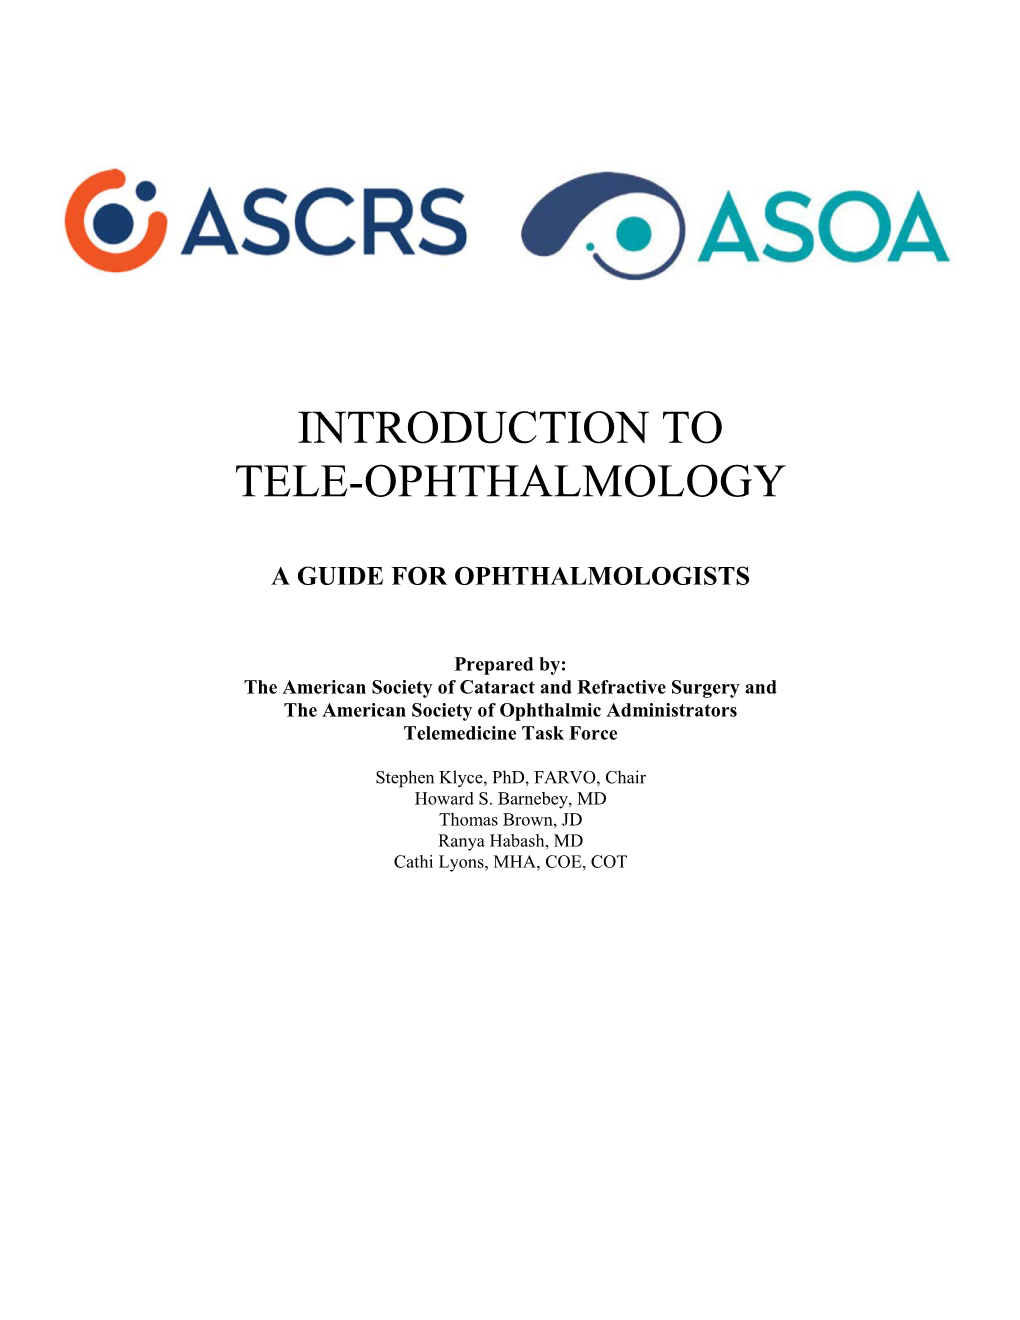 Introduction to Tele-Ophthalmology